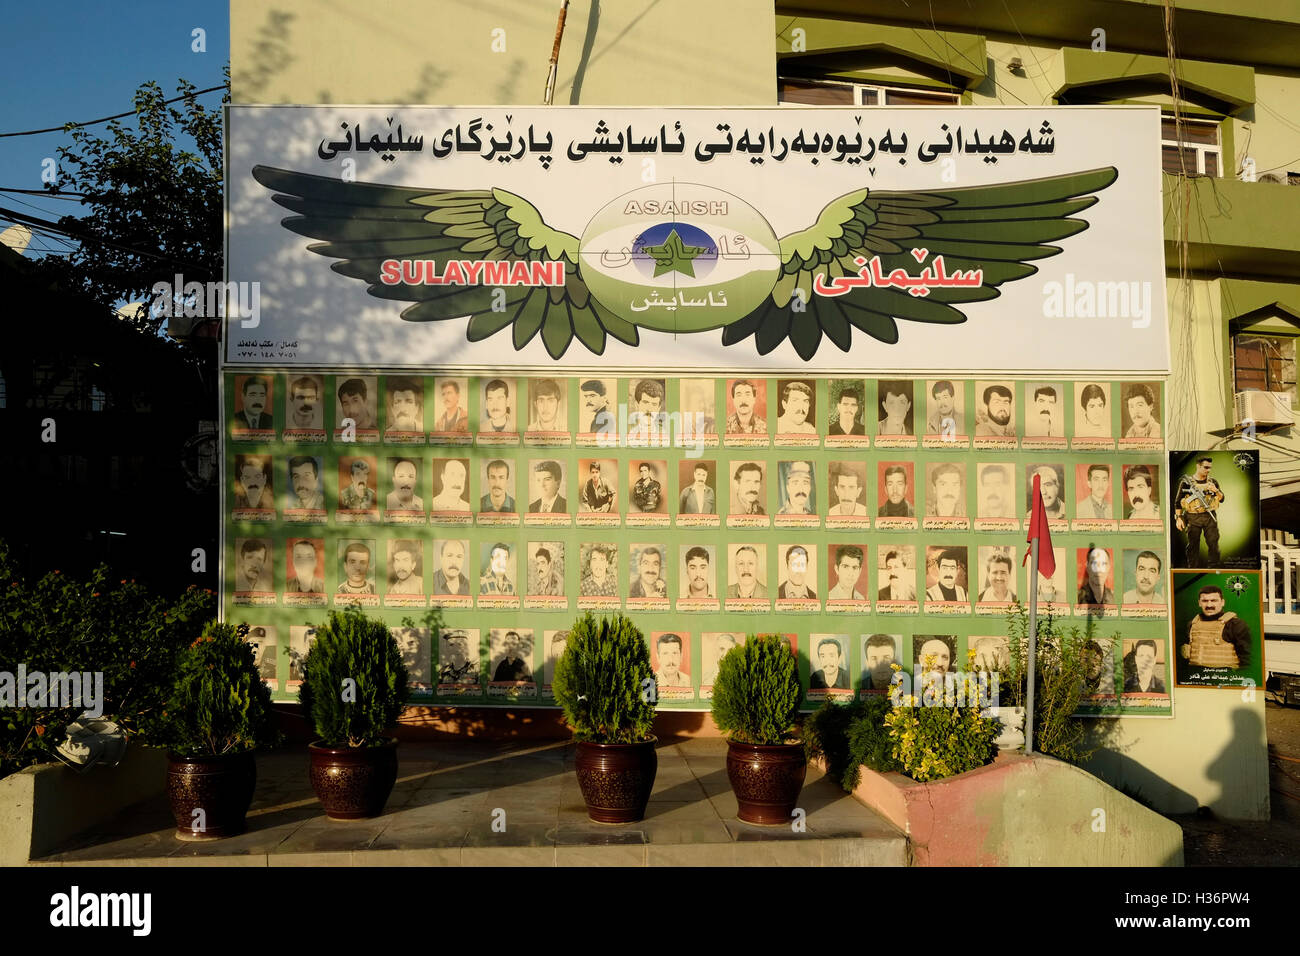 A memorial wall for fallen security personal at the courtyard of the headquarters of the Kurdish intelligence security unit of the Asayiş or Asayish the Kurdish security organization and the primary intelligence agency operating in the Kurdistan region in Iraq. City of Sulaymanieh or Sulaymaniyah Northern Iraq. Stock Photo